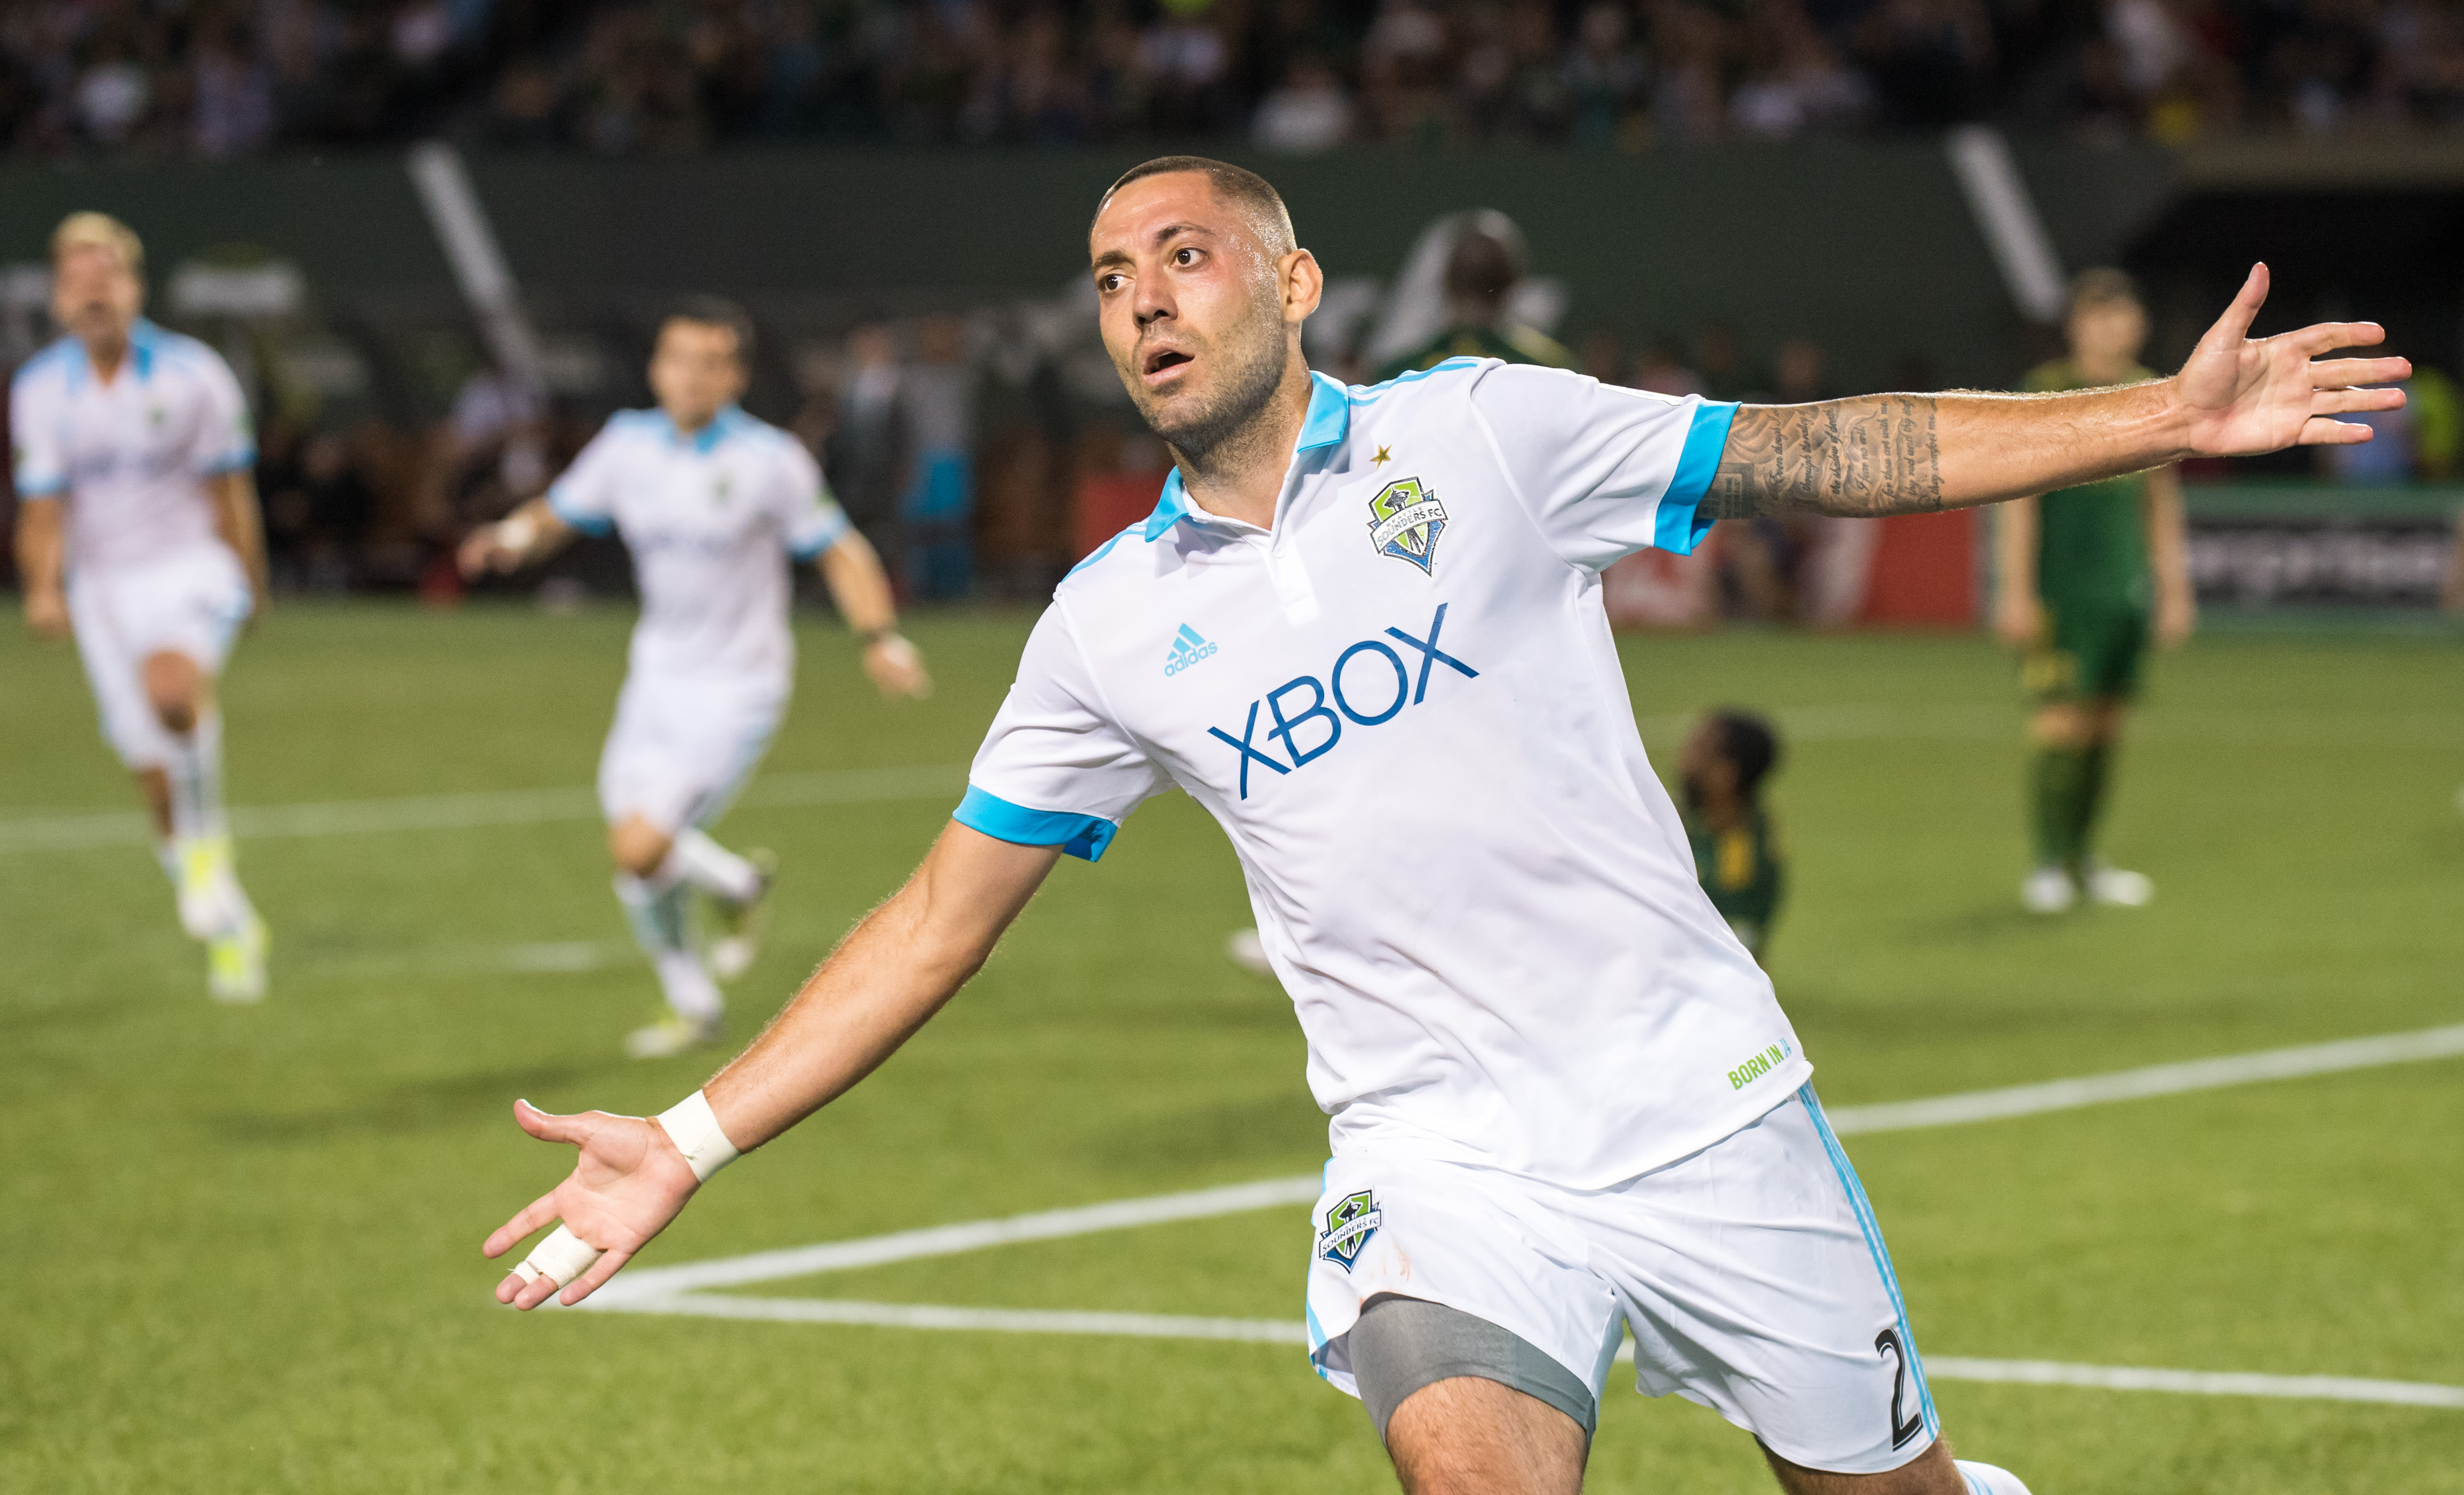 WATCH: Clint Dempsey scores impressive goal in charity match with stunning  bicycle kick